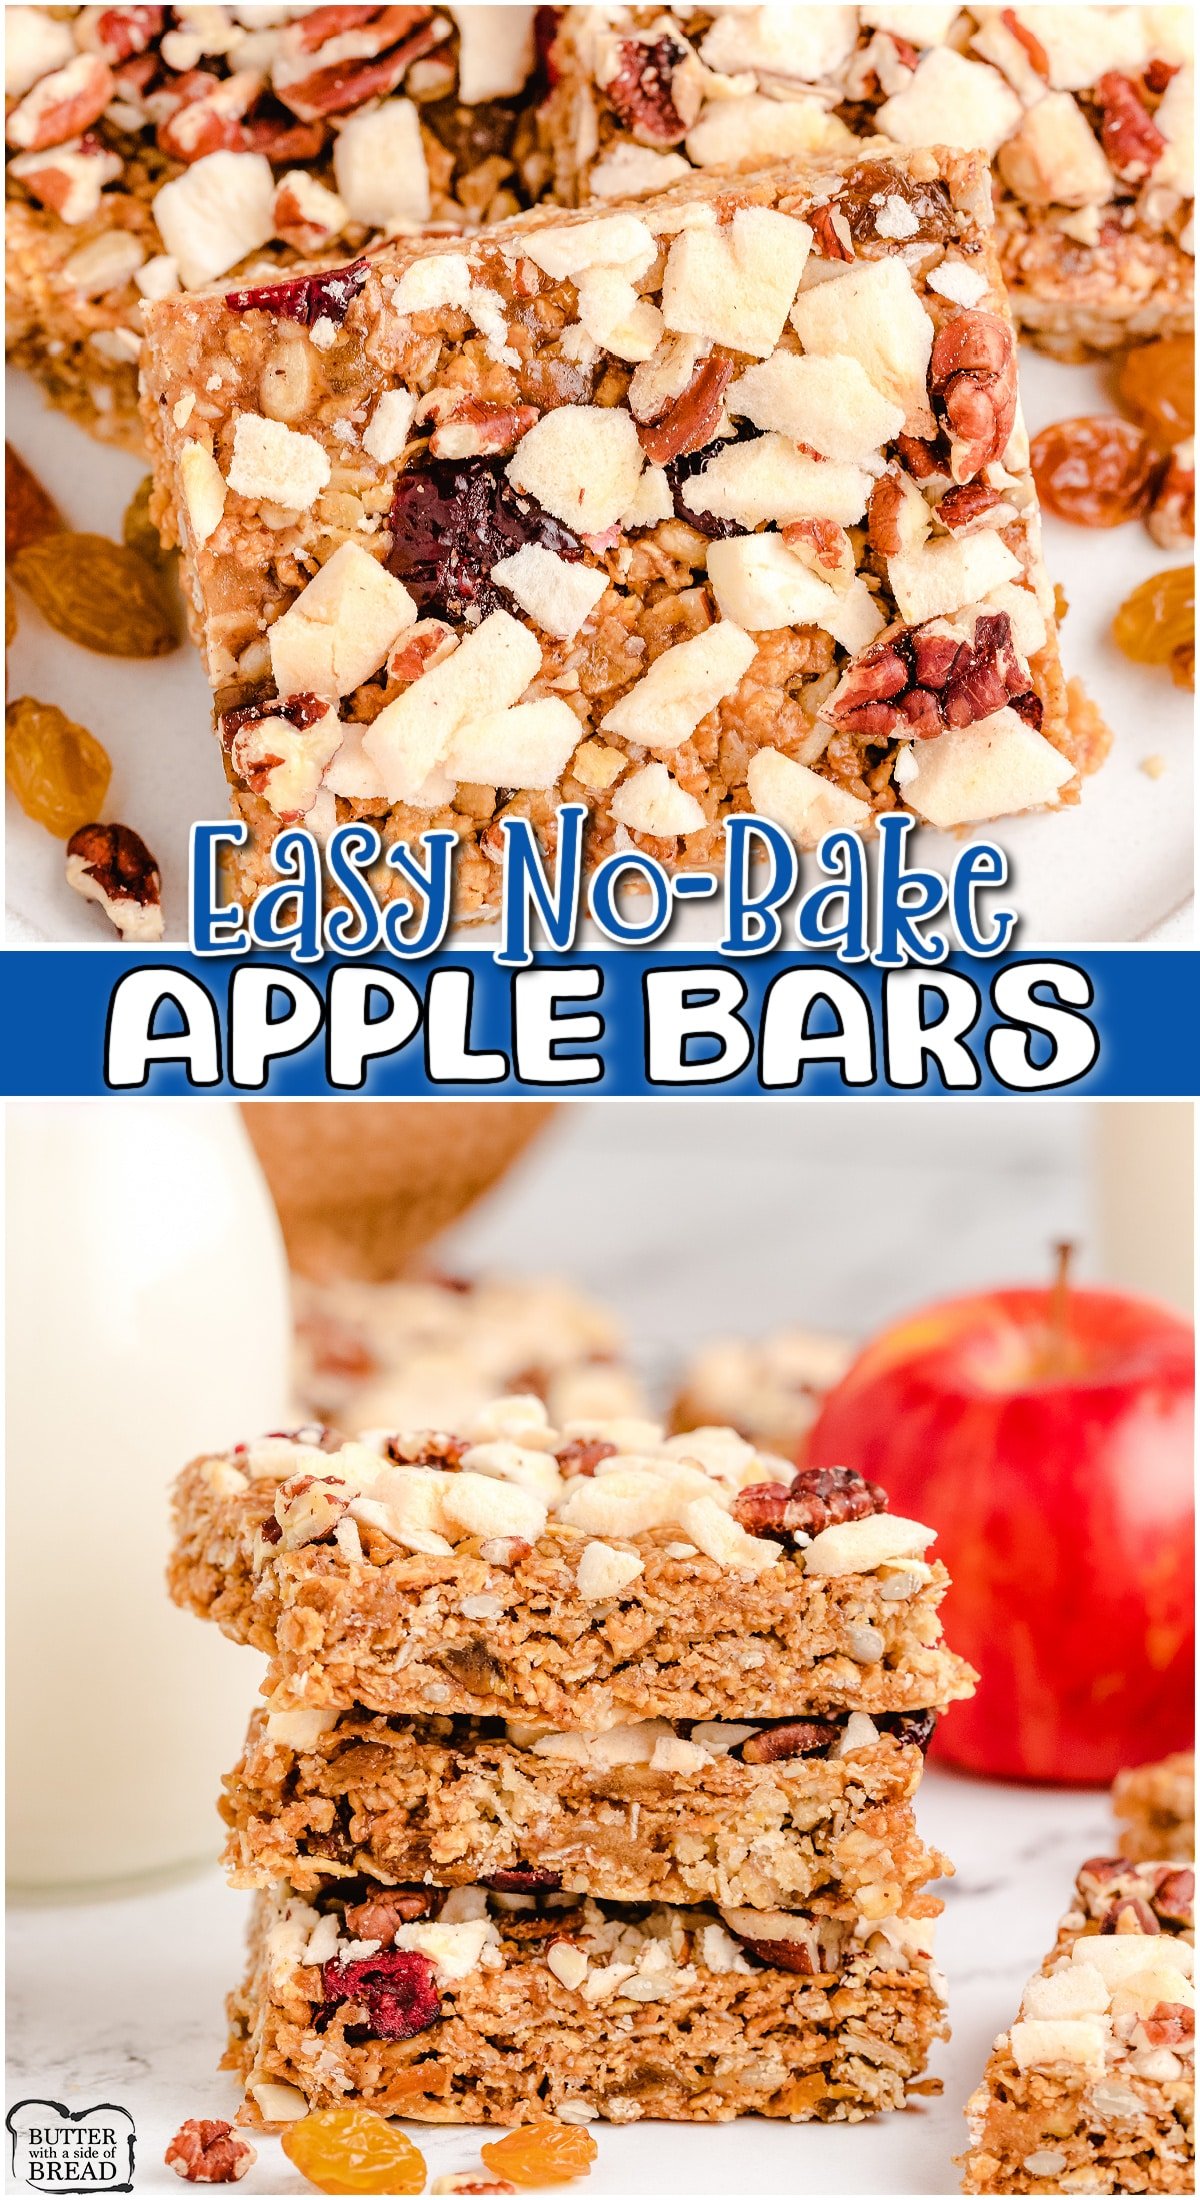 No Bake Apple Bars an incredibly delicious, healthy homemade snack made with dried apples, whole grain cereal, raisins, oats, peanut butter and honey! Perfect no-bake snack for after school eats!